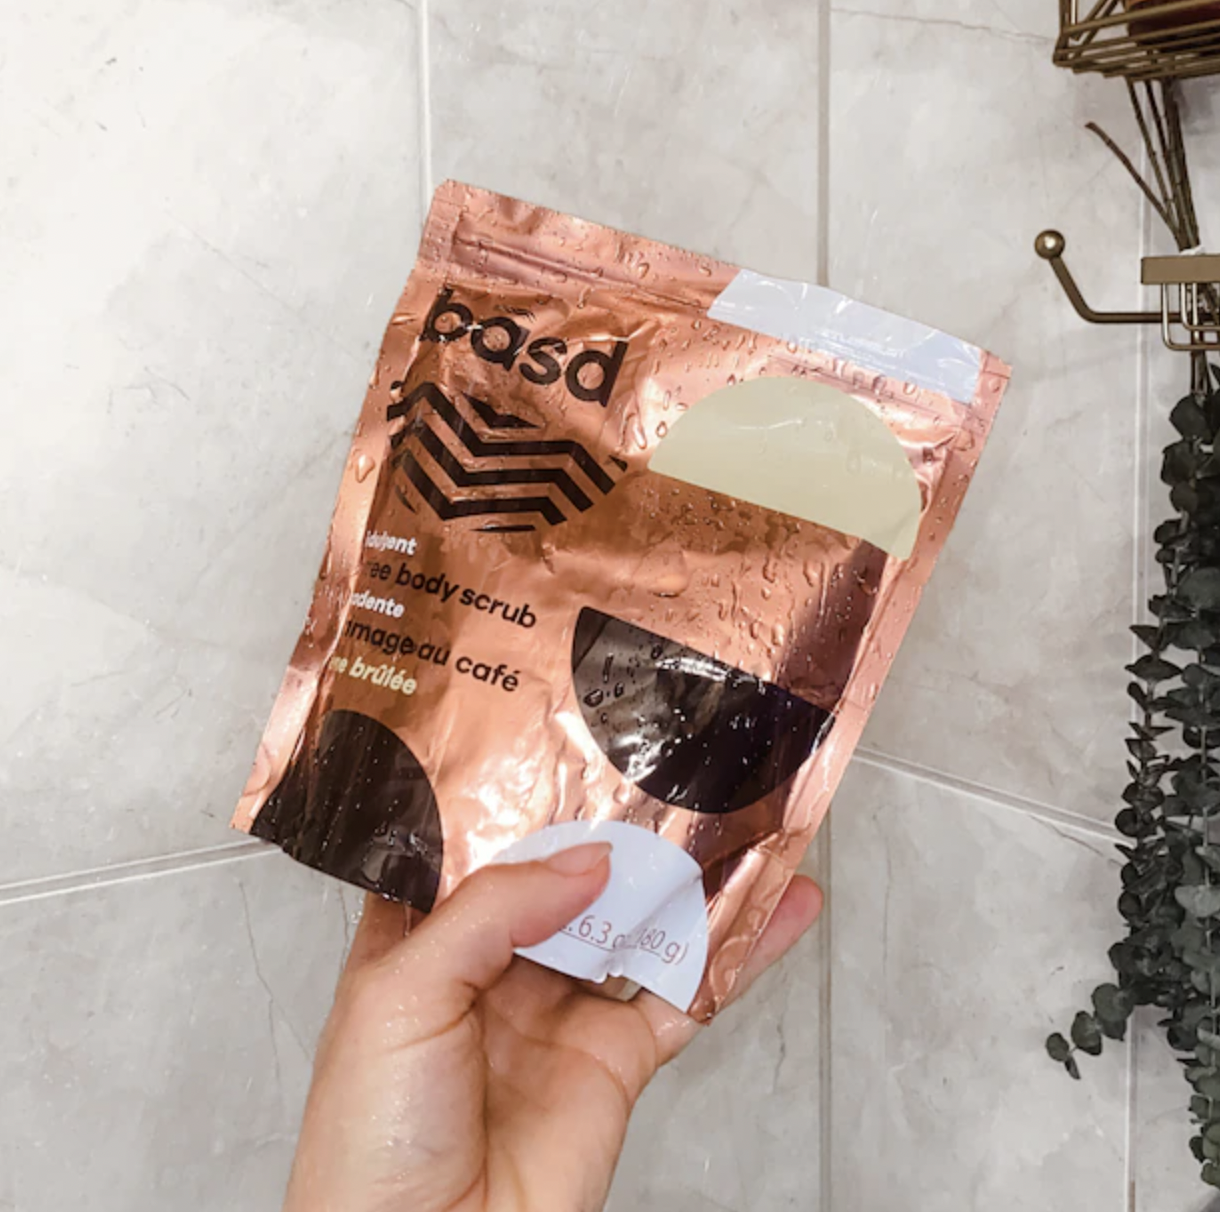 a person holding up a bag of the coffee scrub in their bathroom